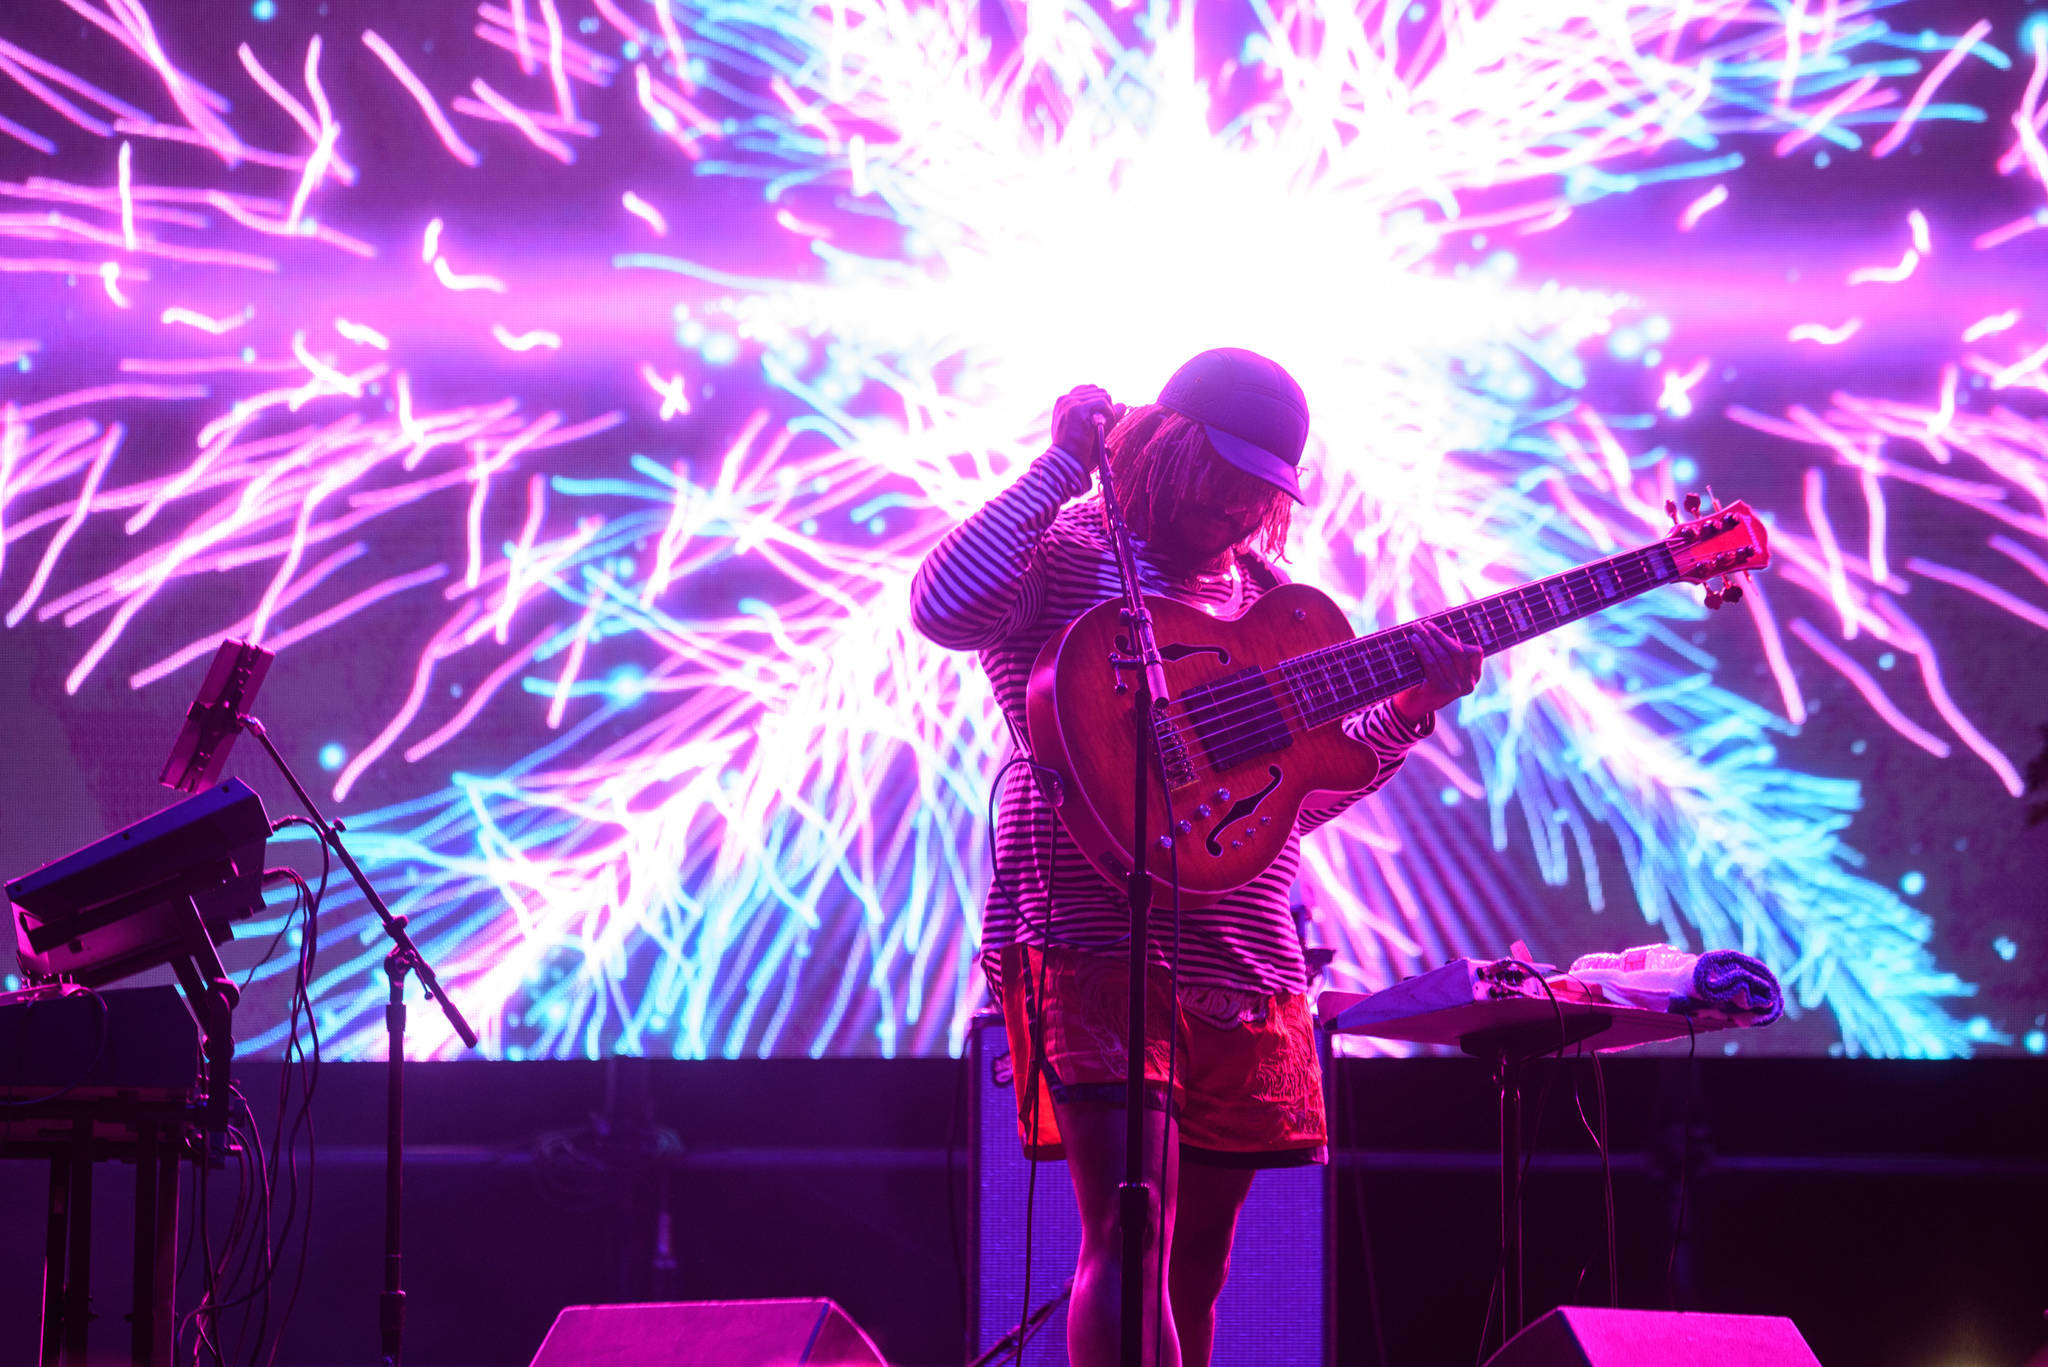 Thundercat deliveres a funky jazz explosion on Friday night.